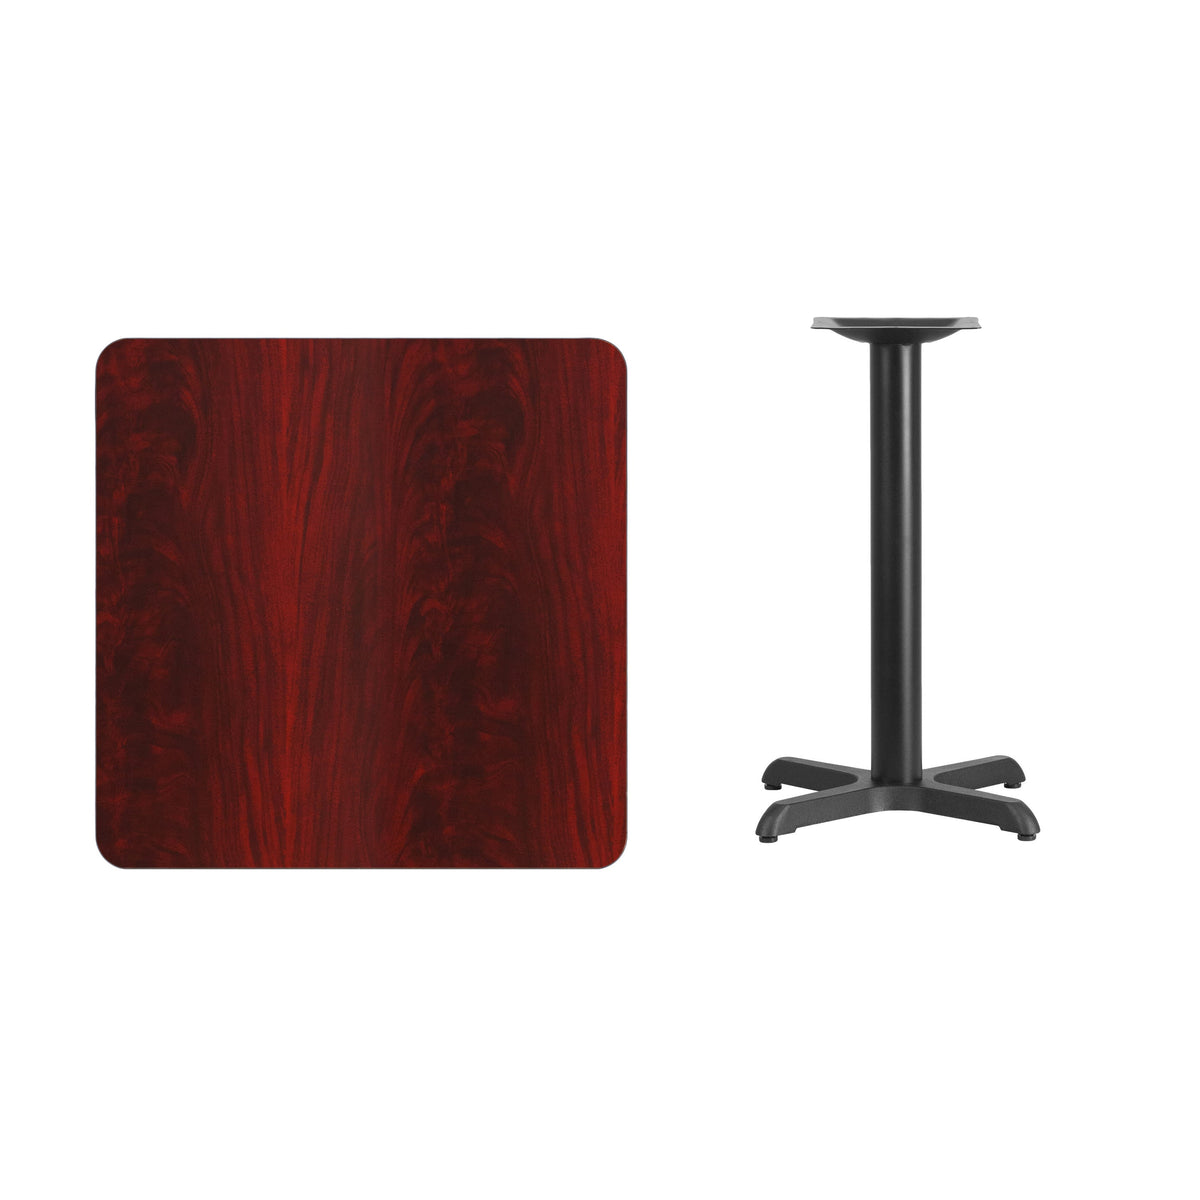 Mahogany |#| 30inch Square Mahogany Laminate Table Top with 22inch x 22inch Table Height Base